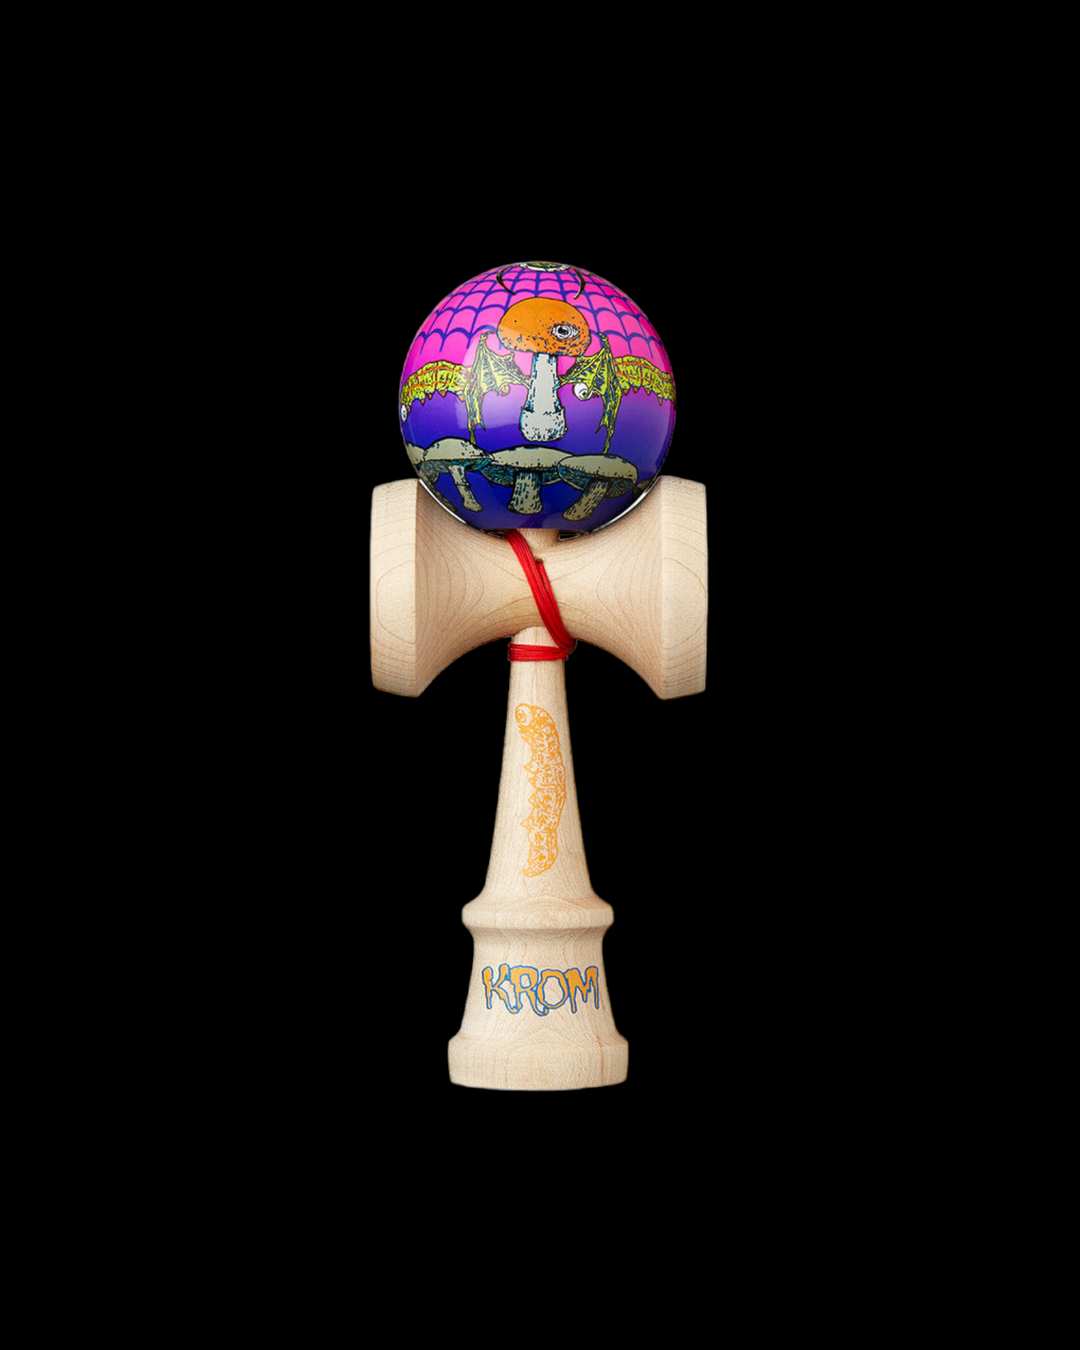 Funeral French - Supposed to Rot  KROM Kendama   